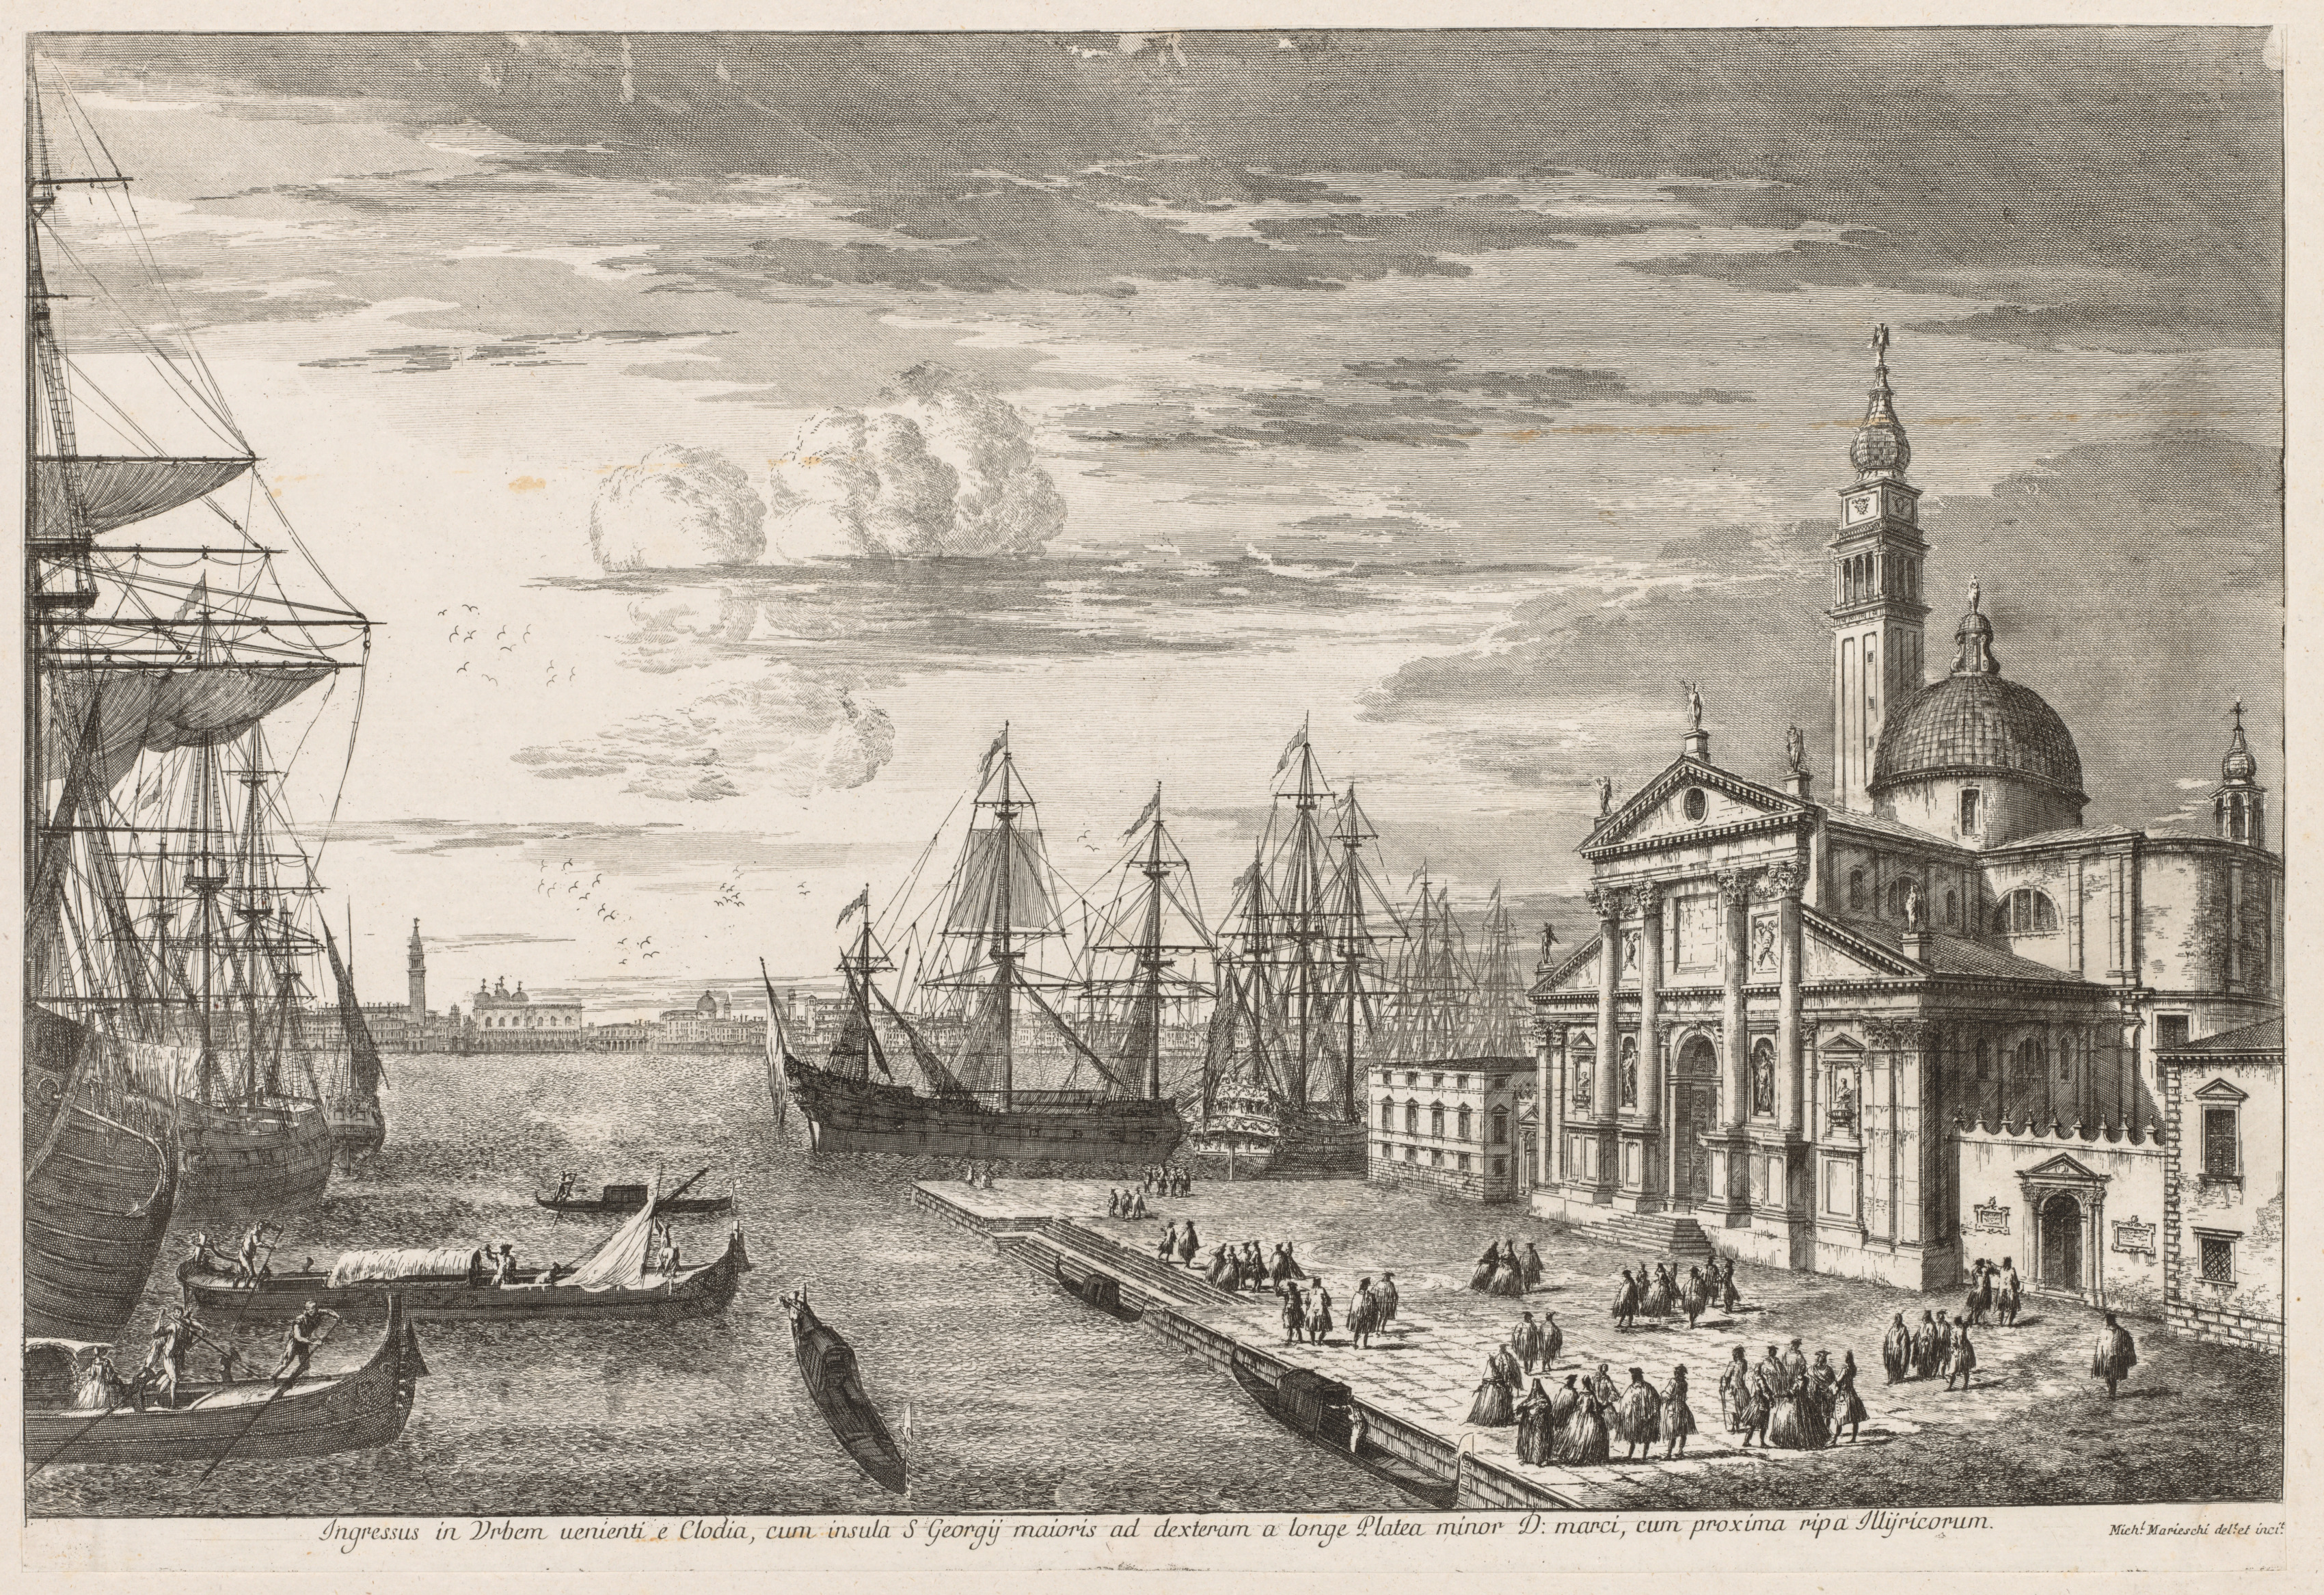 Views of Venice:  The Basin of St. Mark's